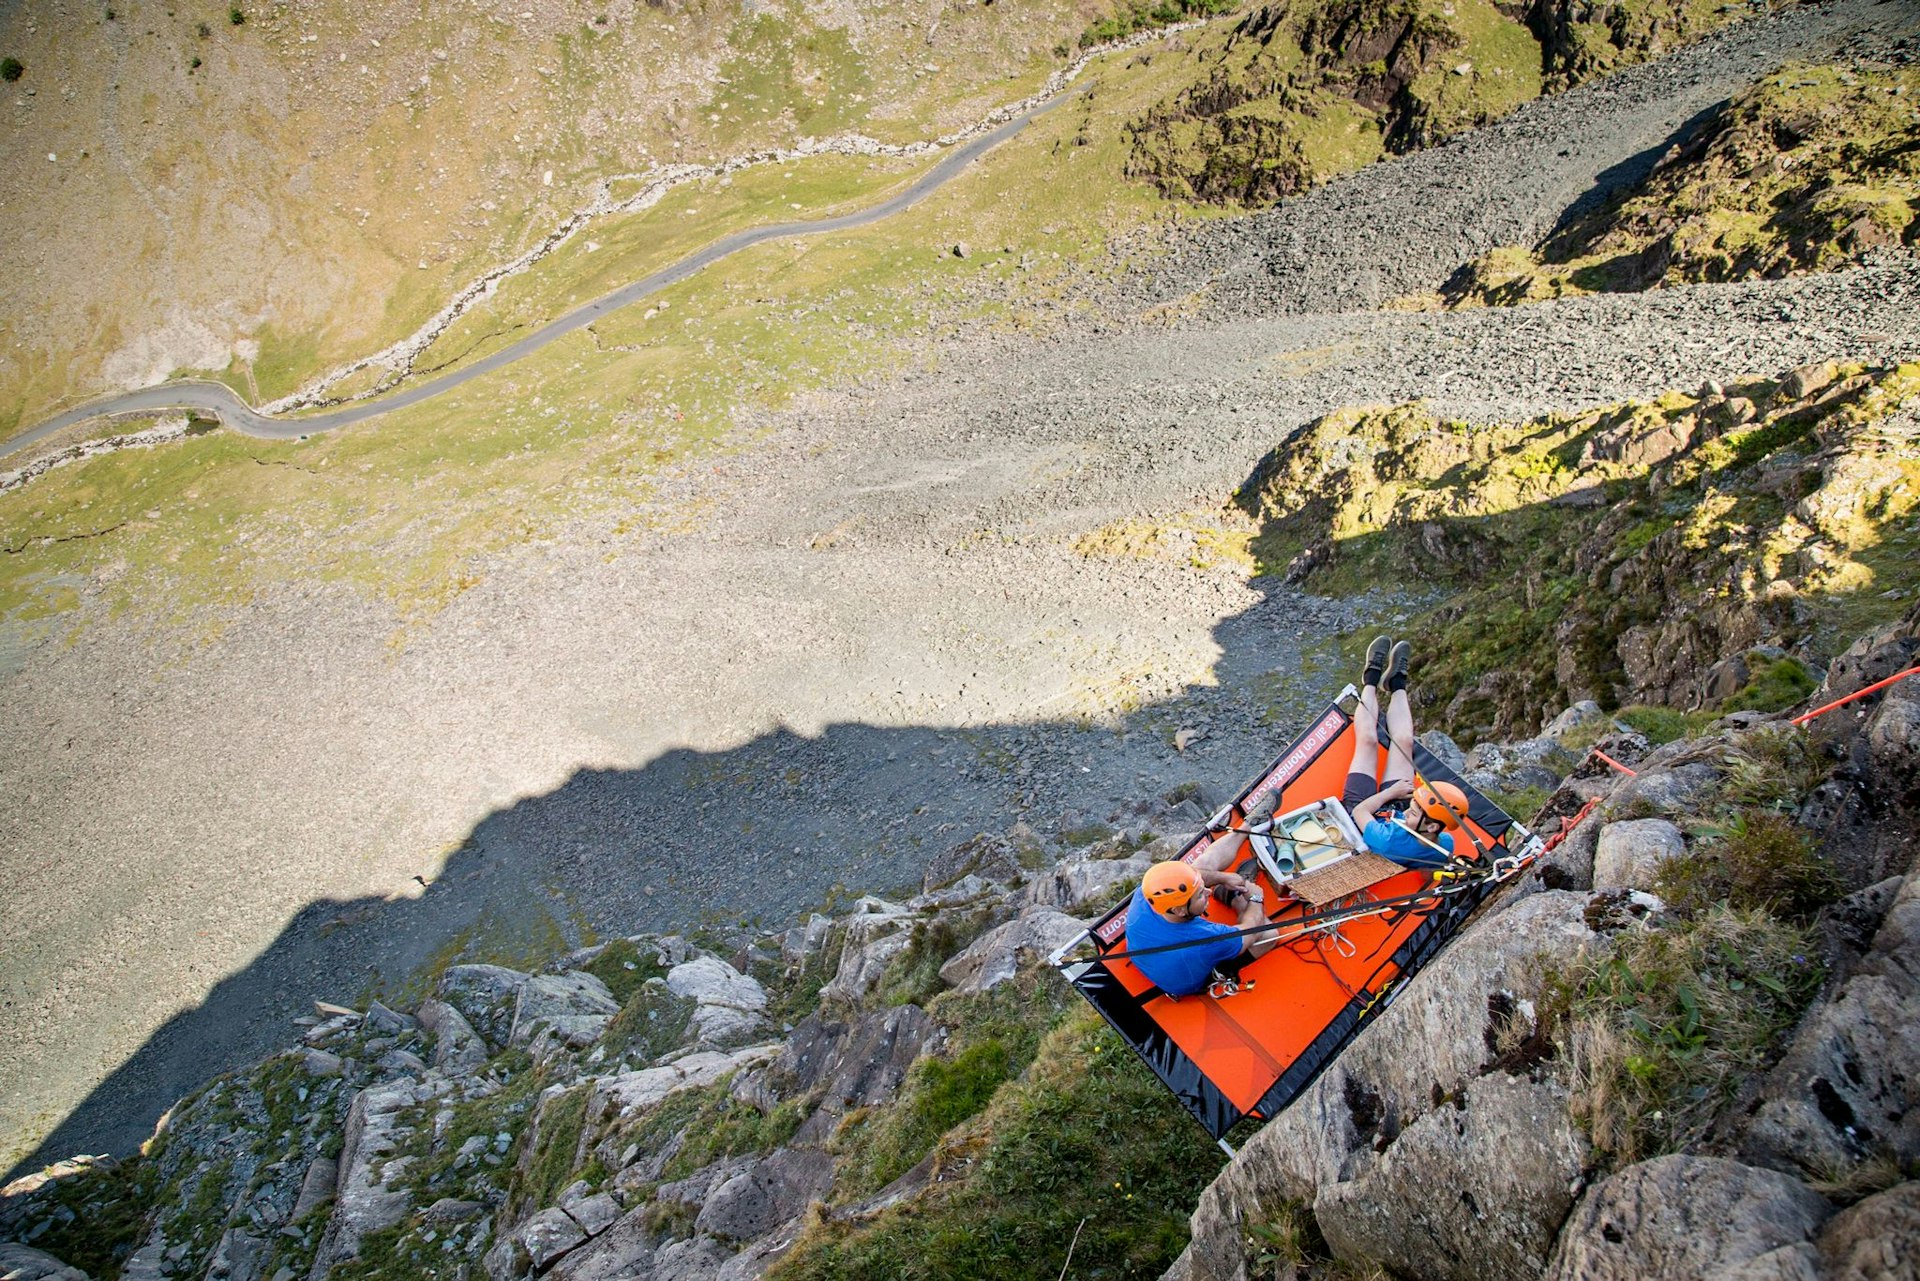 Two people camping at the side of a cliff in Cumbria